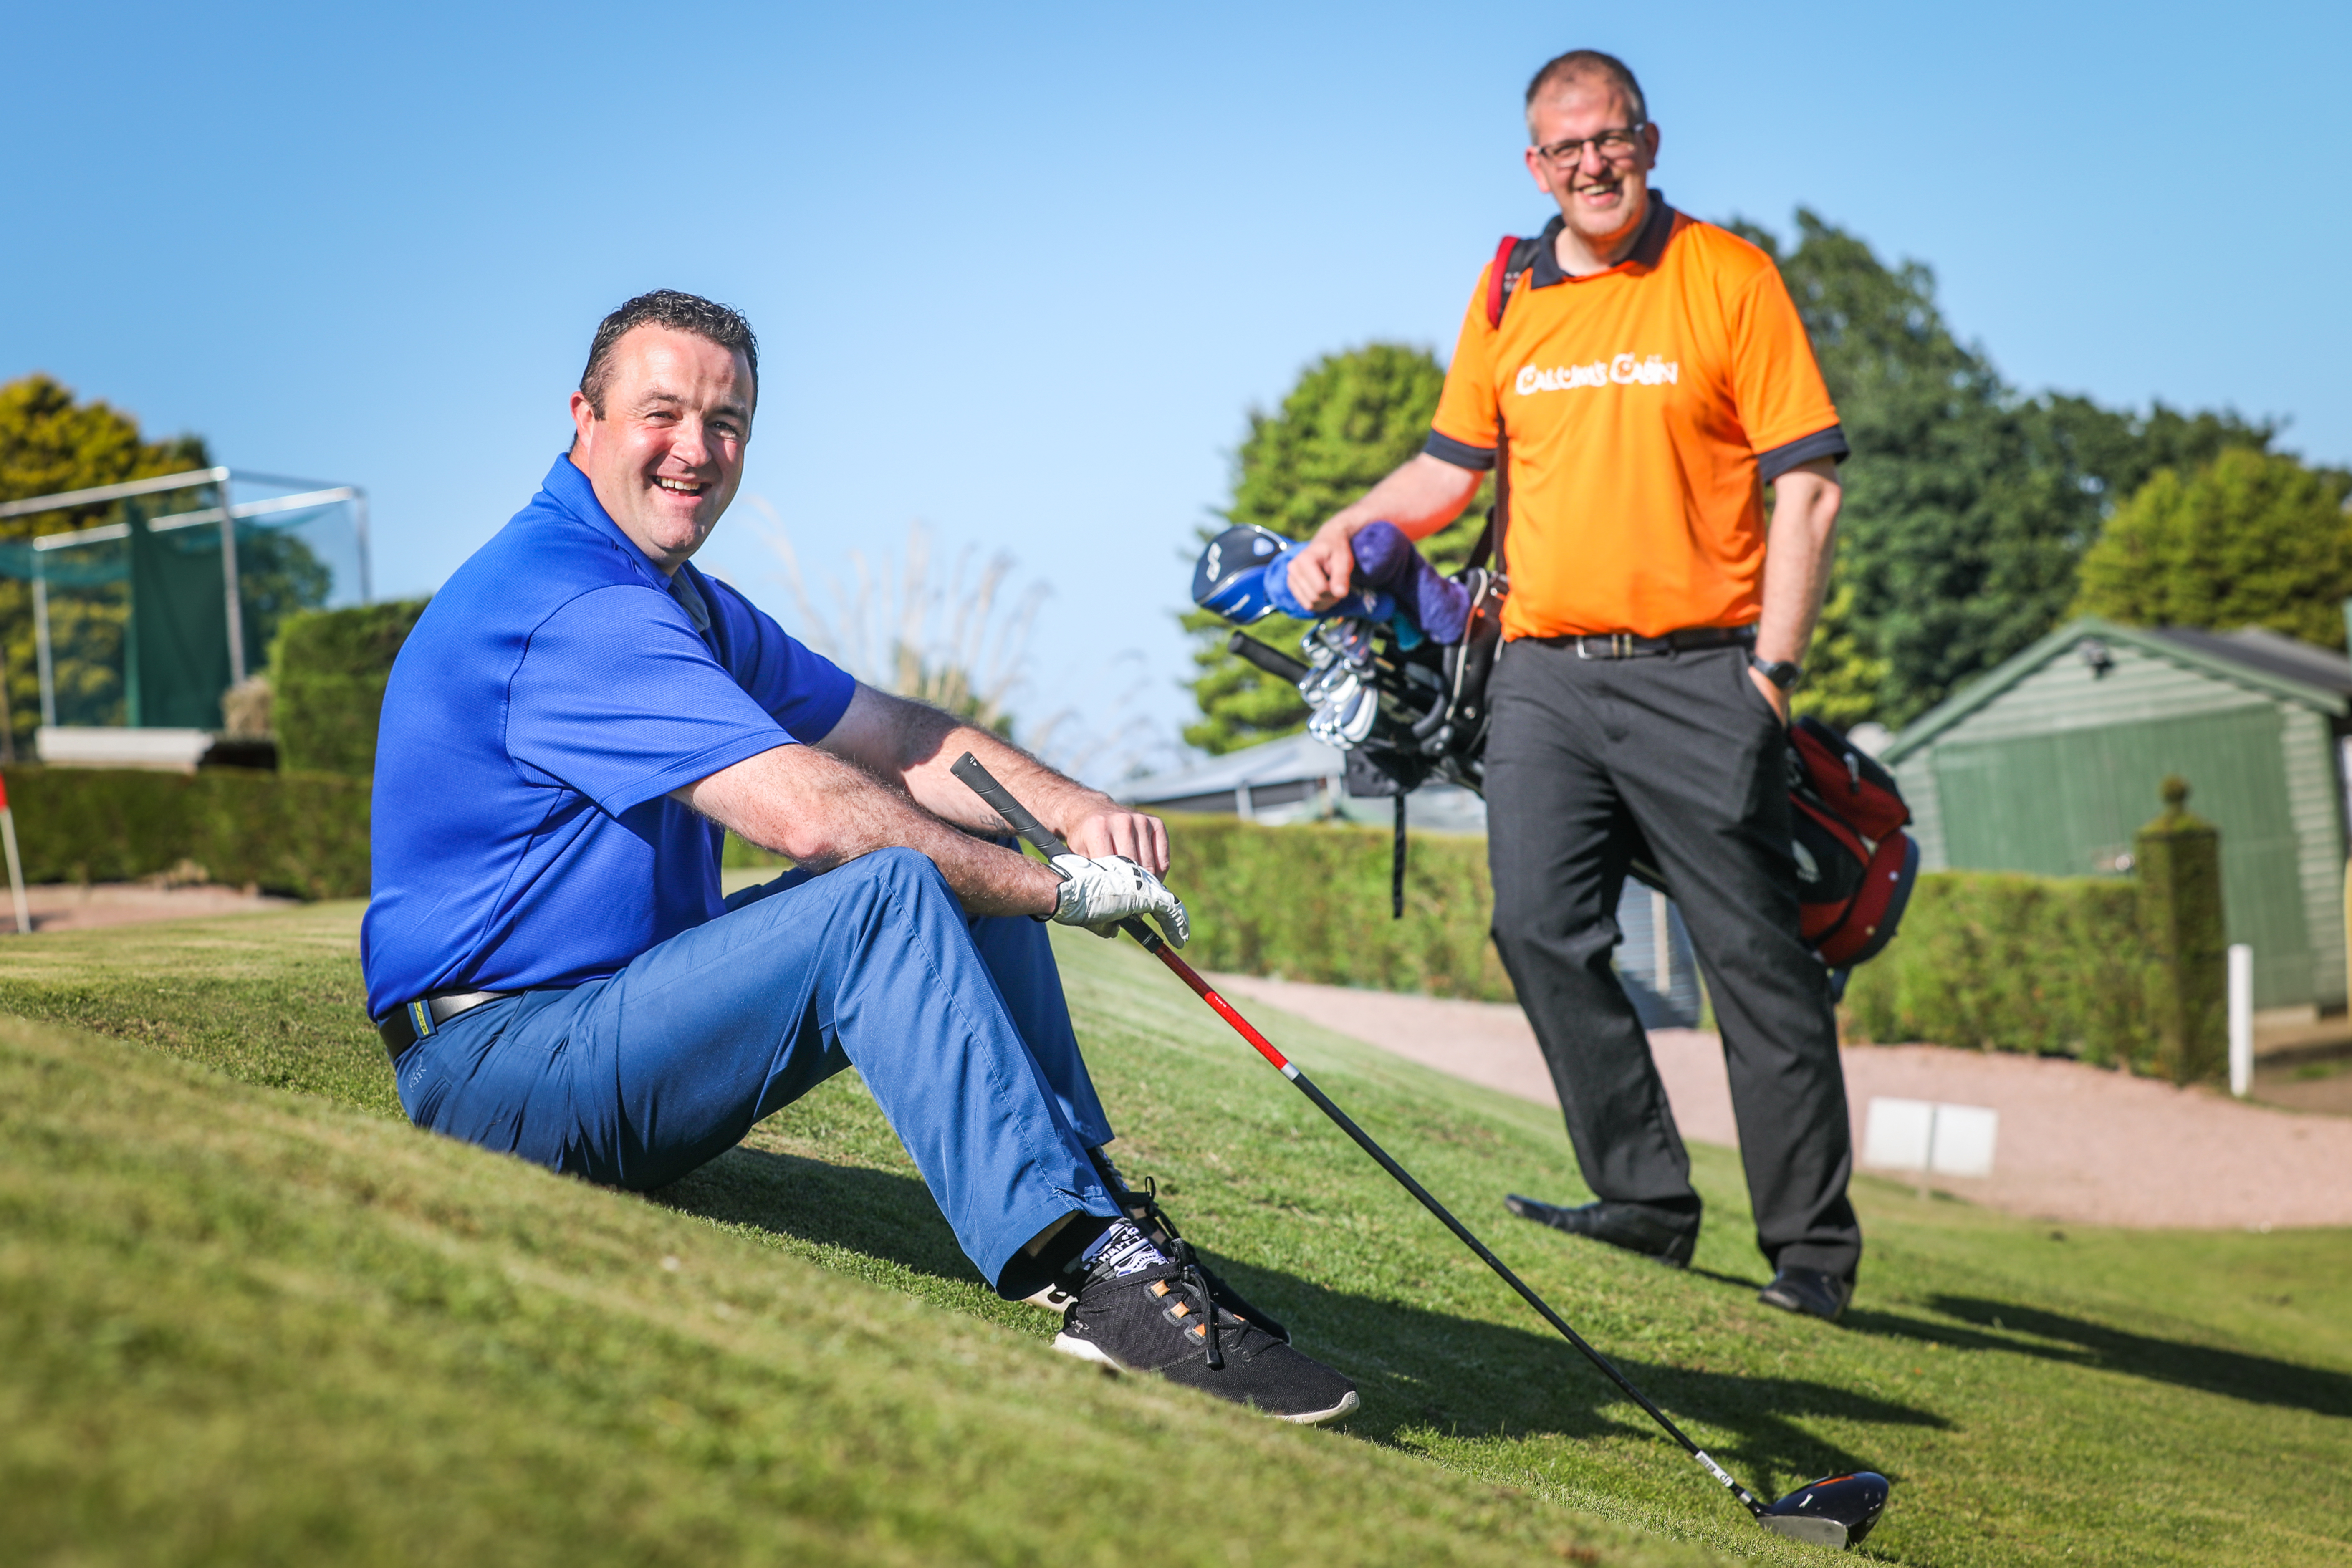 Stuart Rankine and Iain Duncan are playing golf this weekend overnight for 12 hours in aid of charity